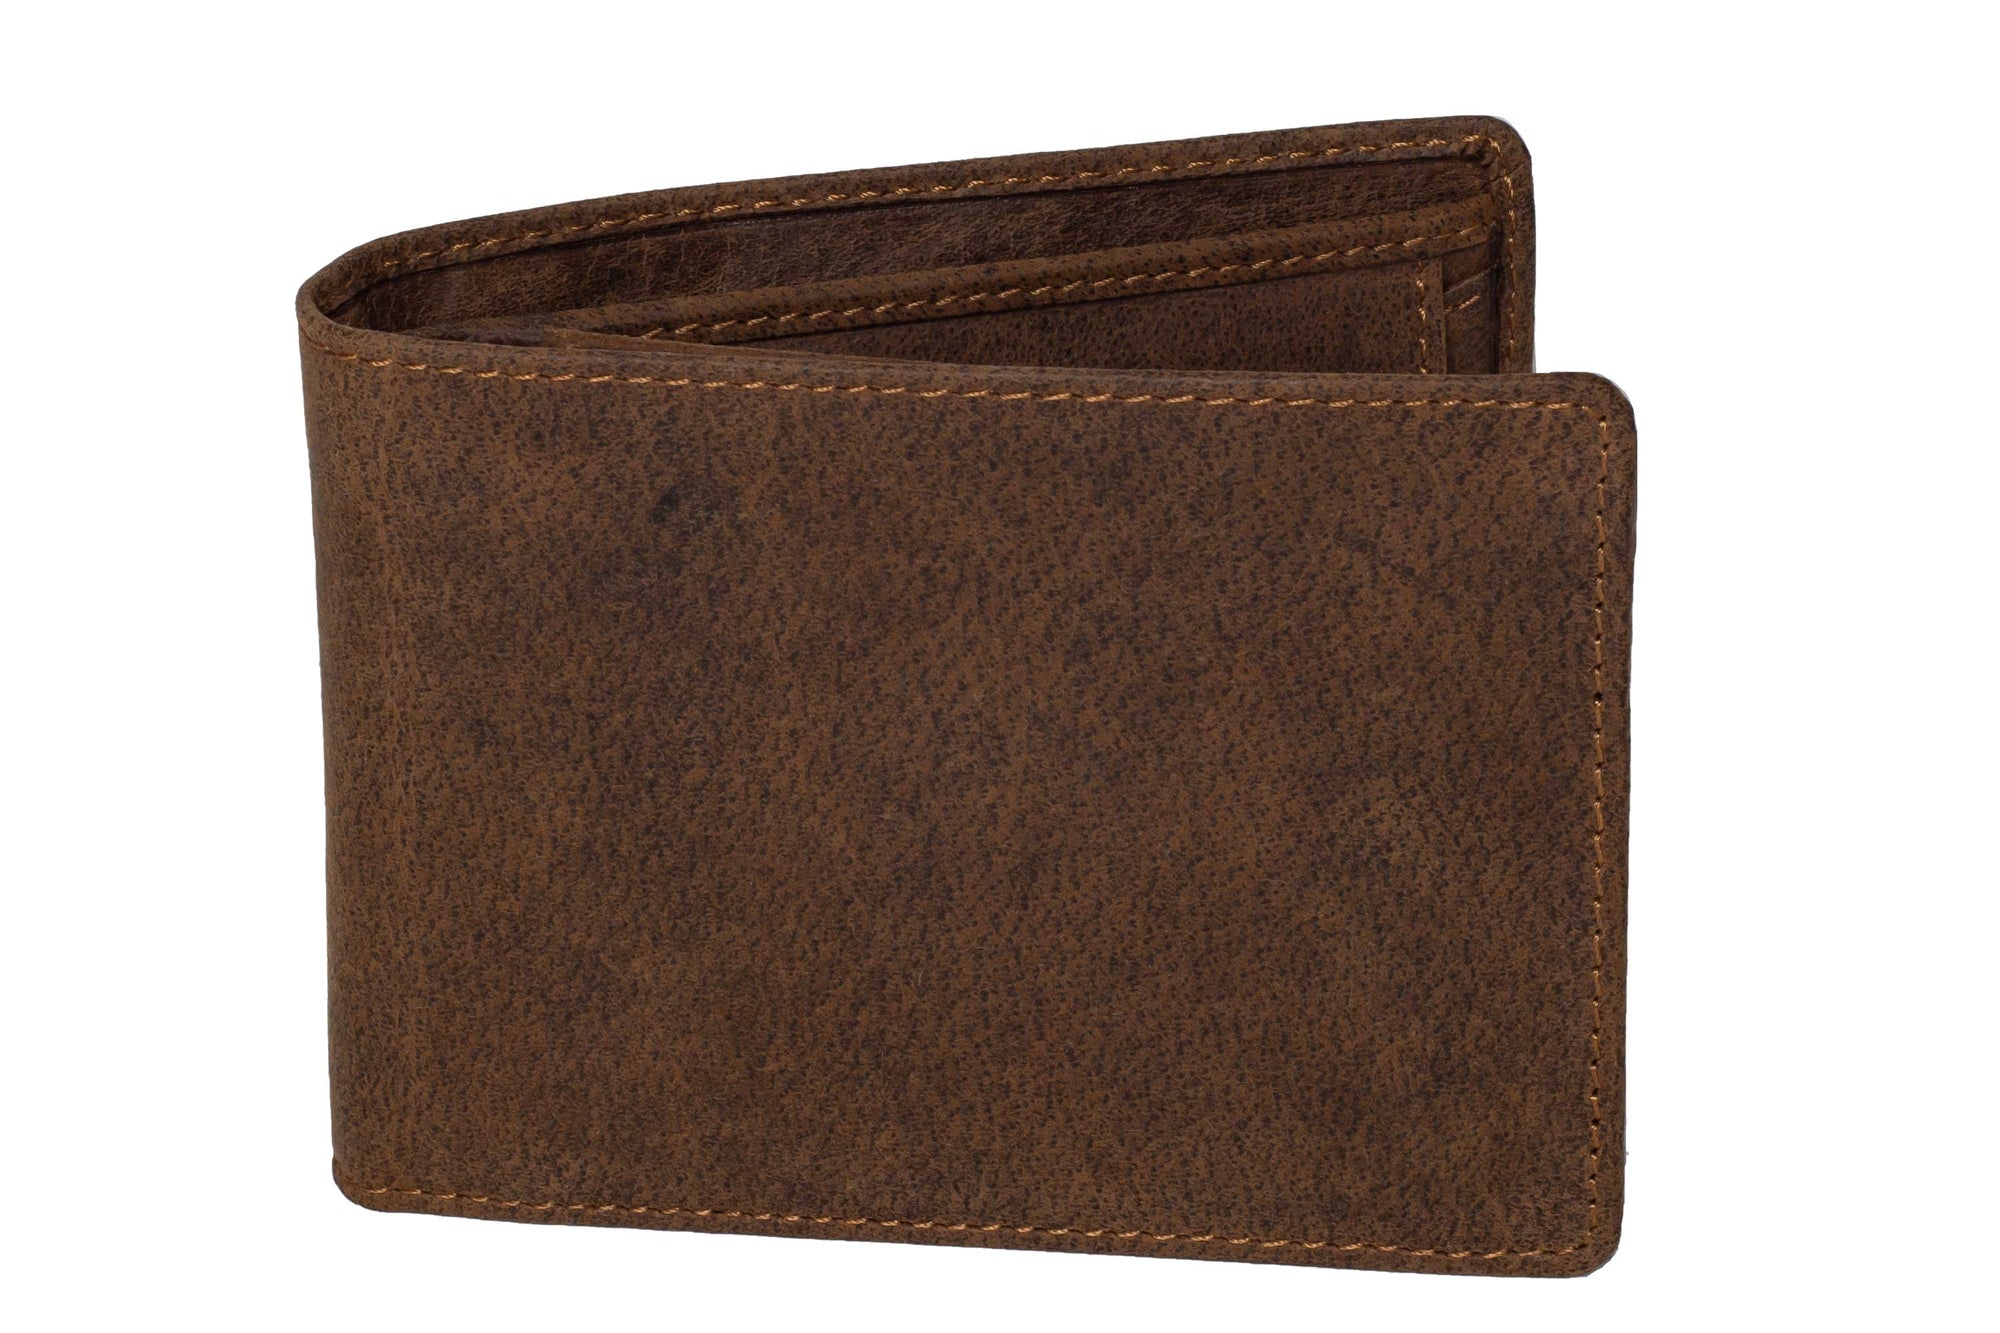 Diloro Men's Leather Wallet Flip ID Coin Section RFID Blocking